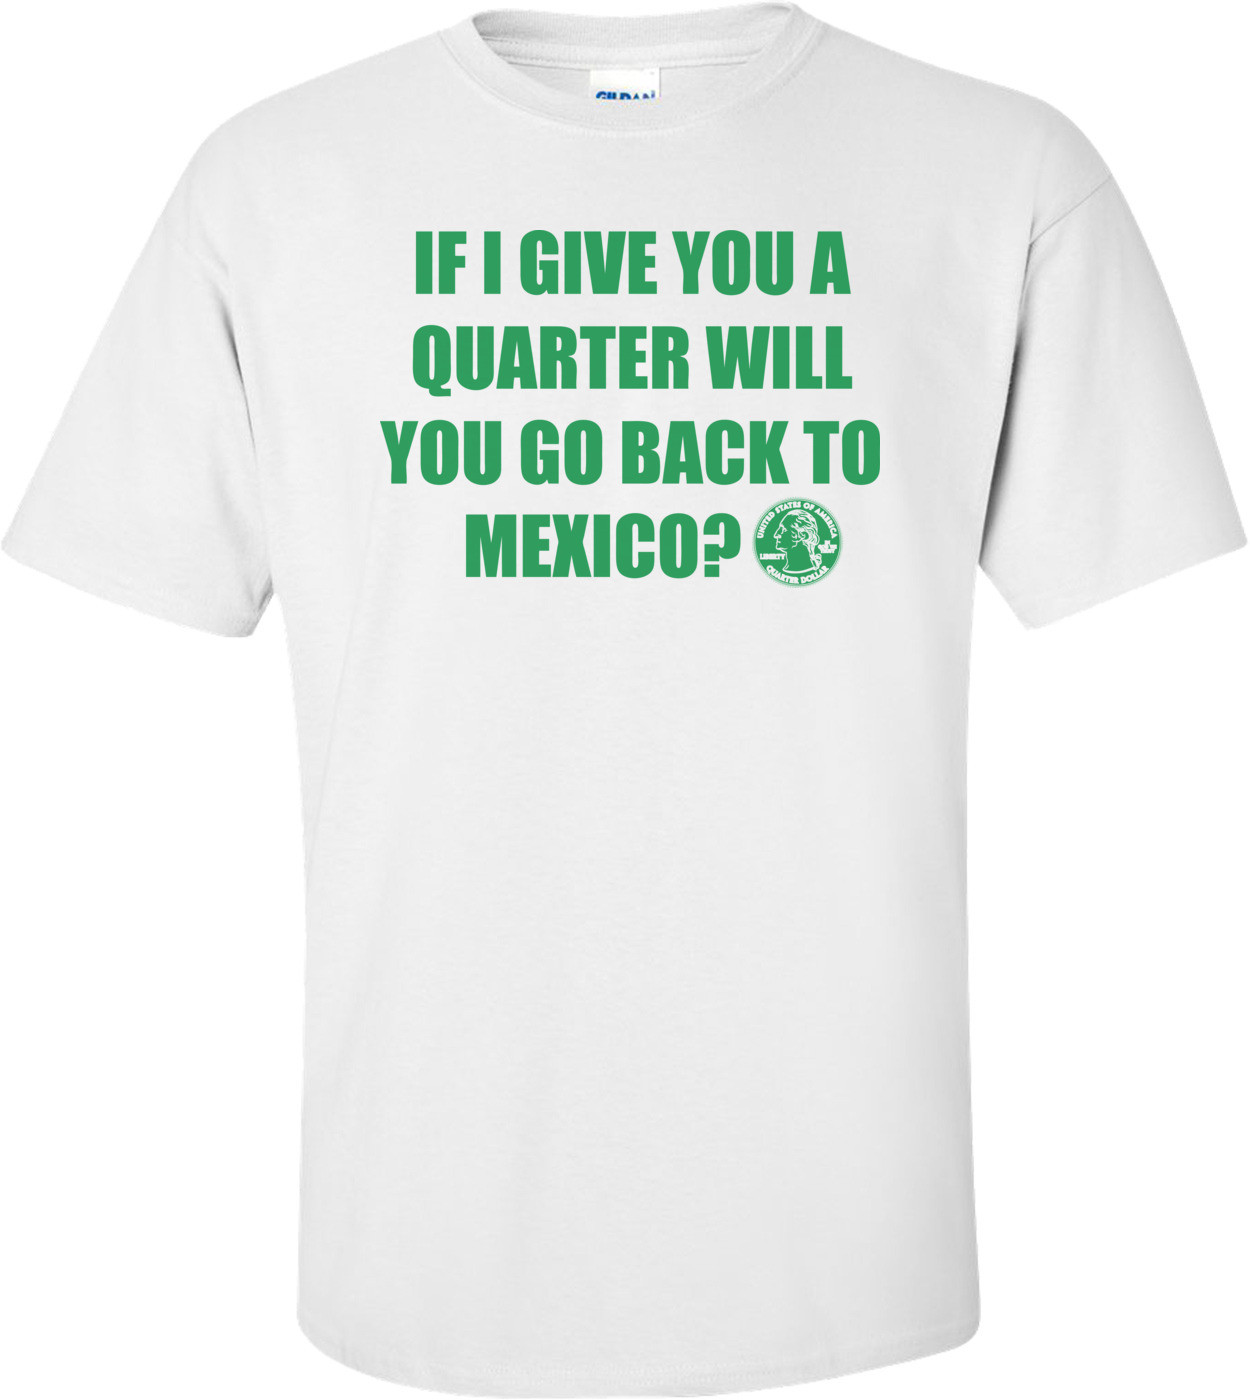 If I Give You A Quarter Will You Go Back To Mexico